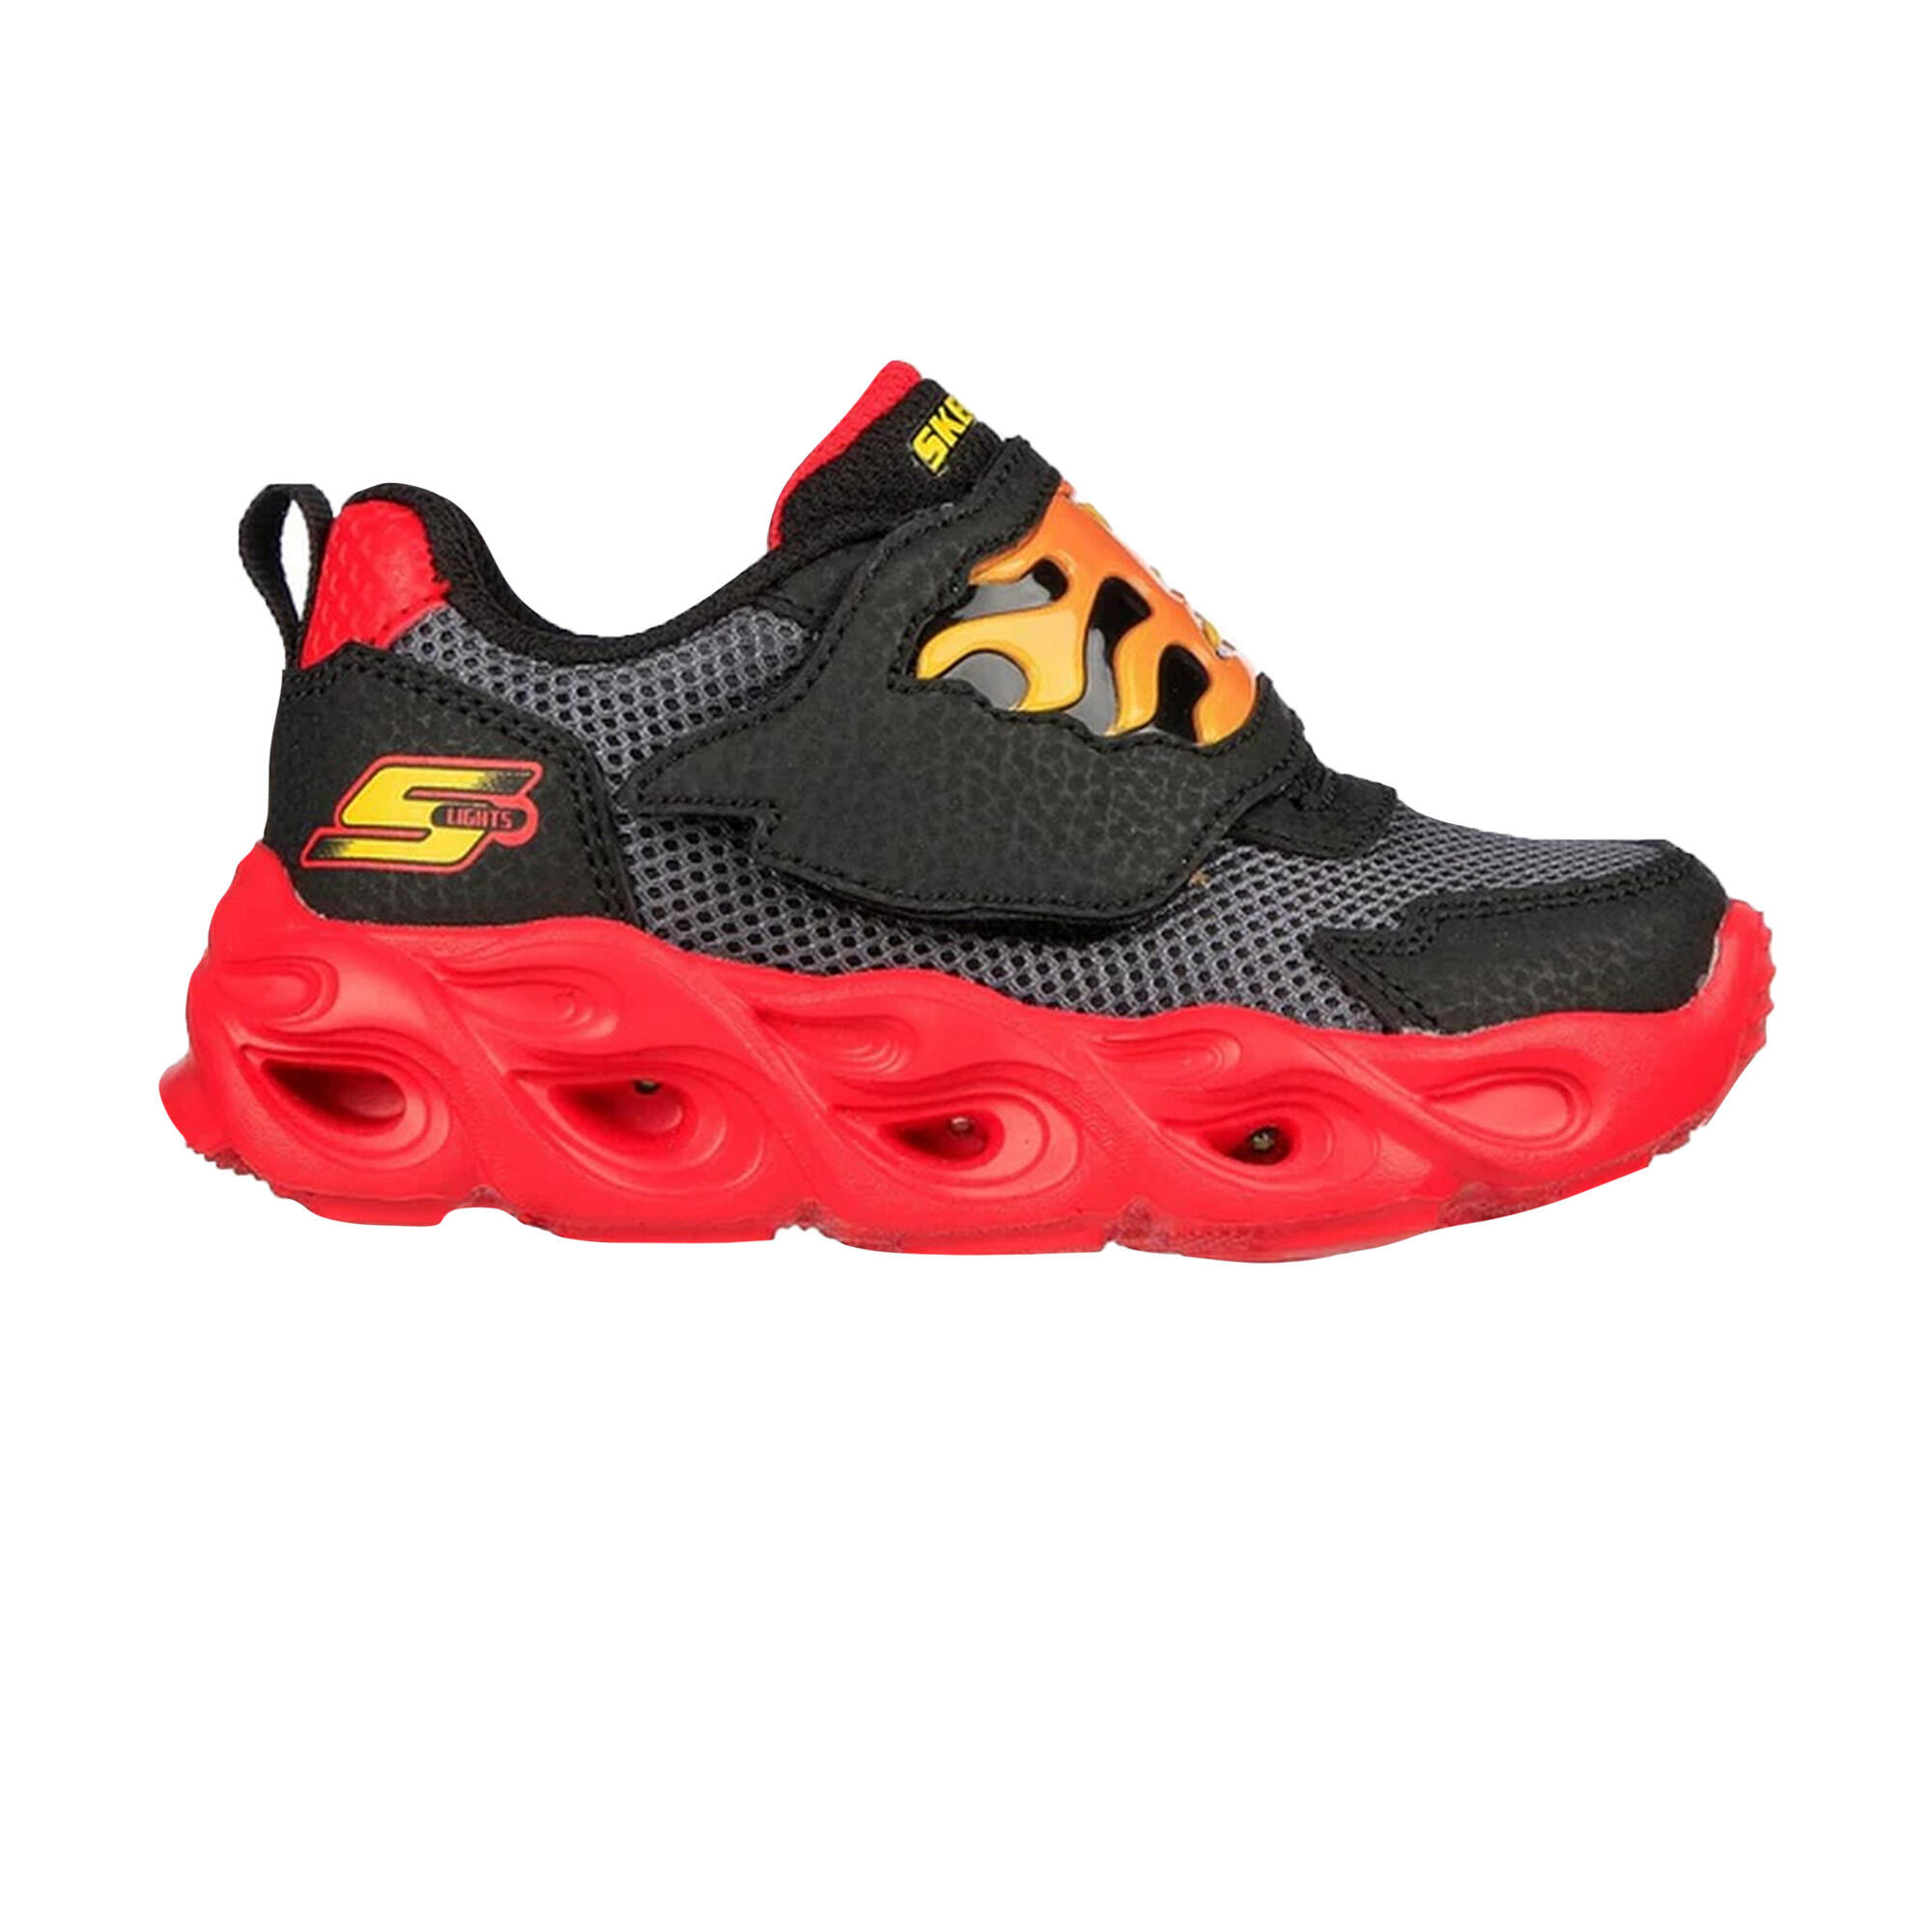 Boys ThermoFlash Flame Flow Trainers (Black/Red) 3/5